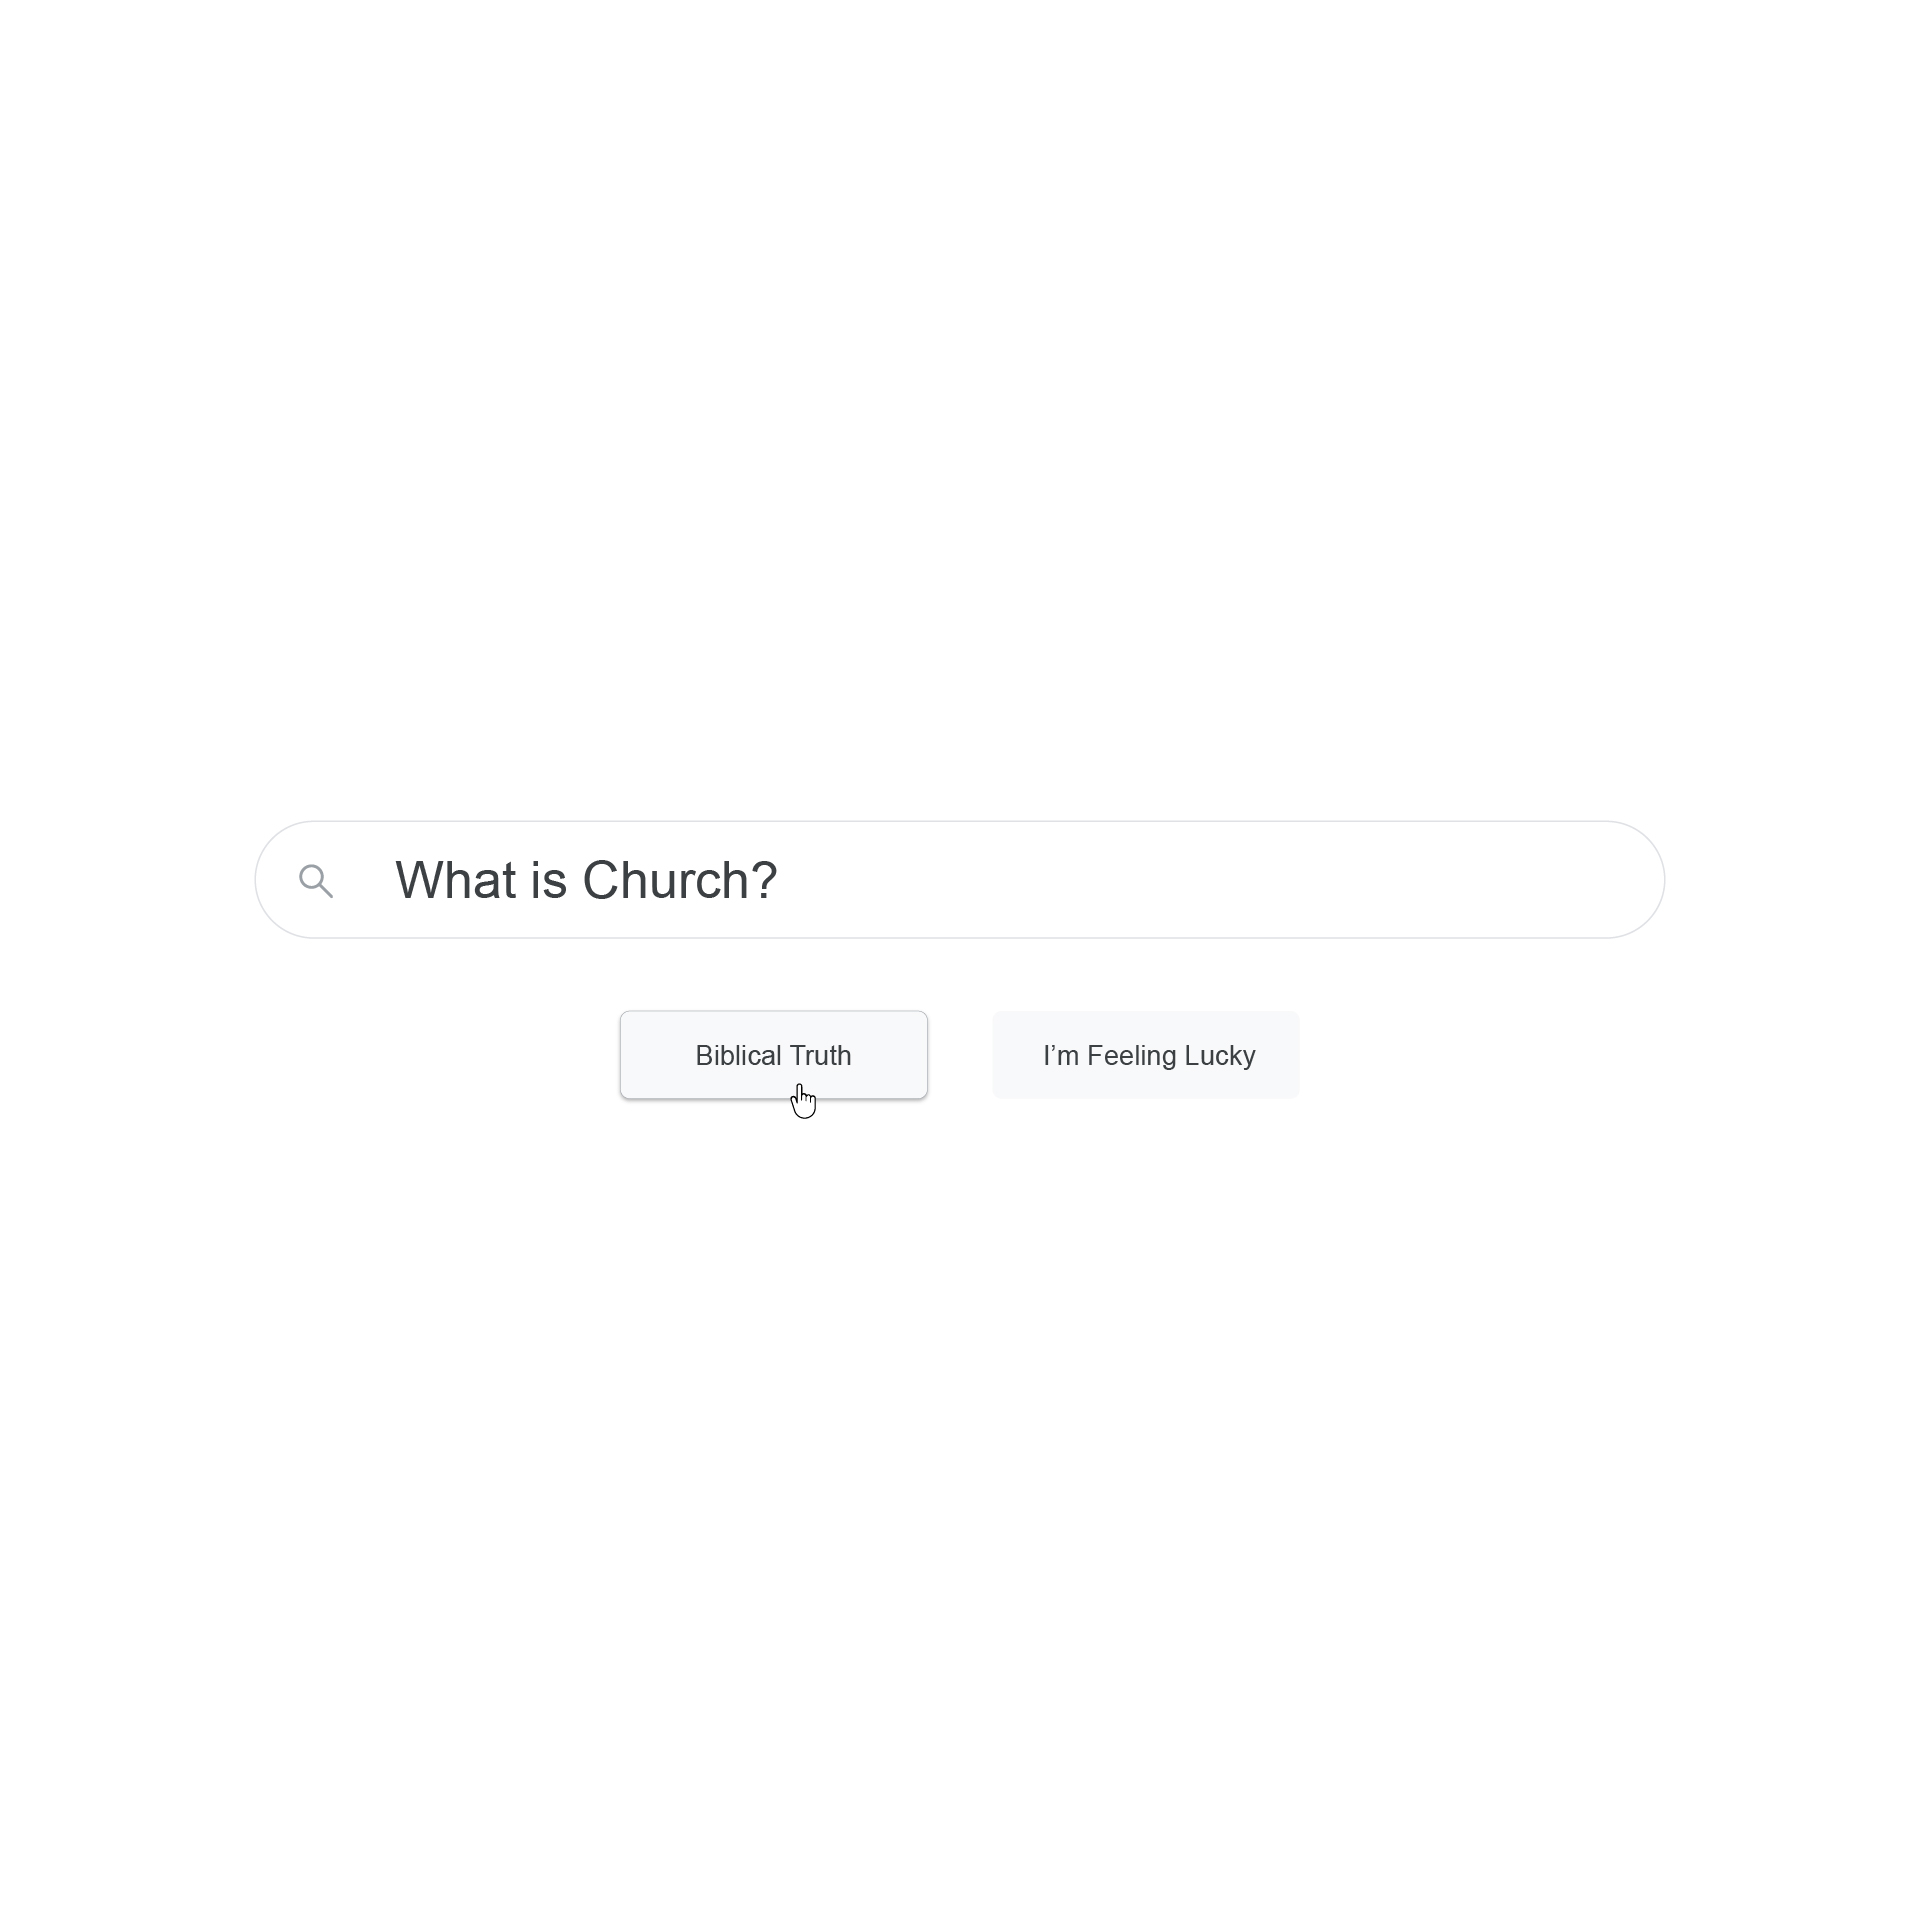 Training in Godliness - What is Church?